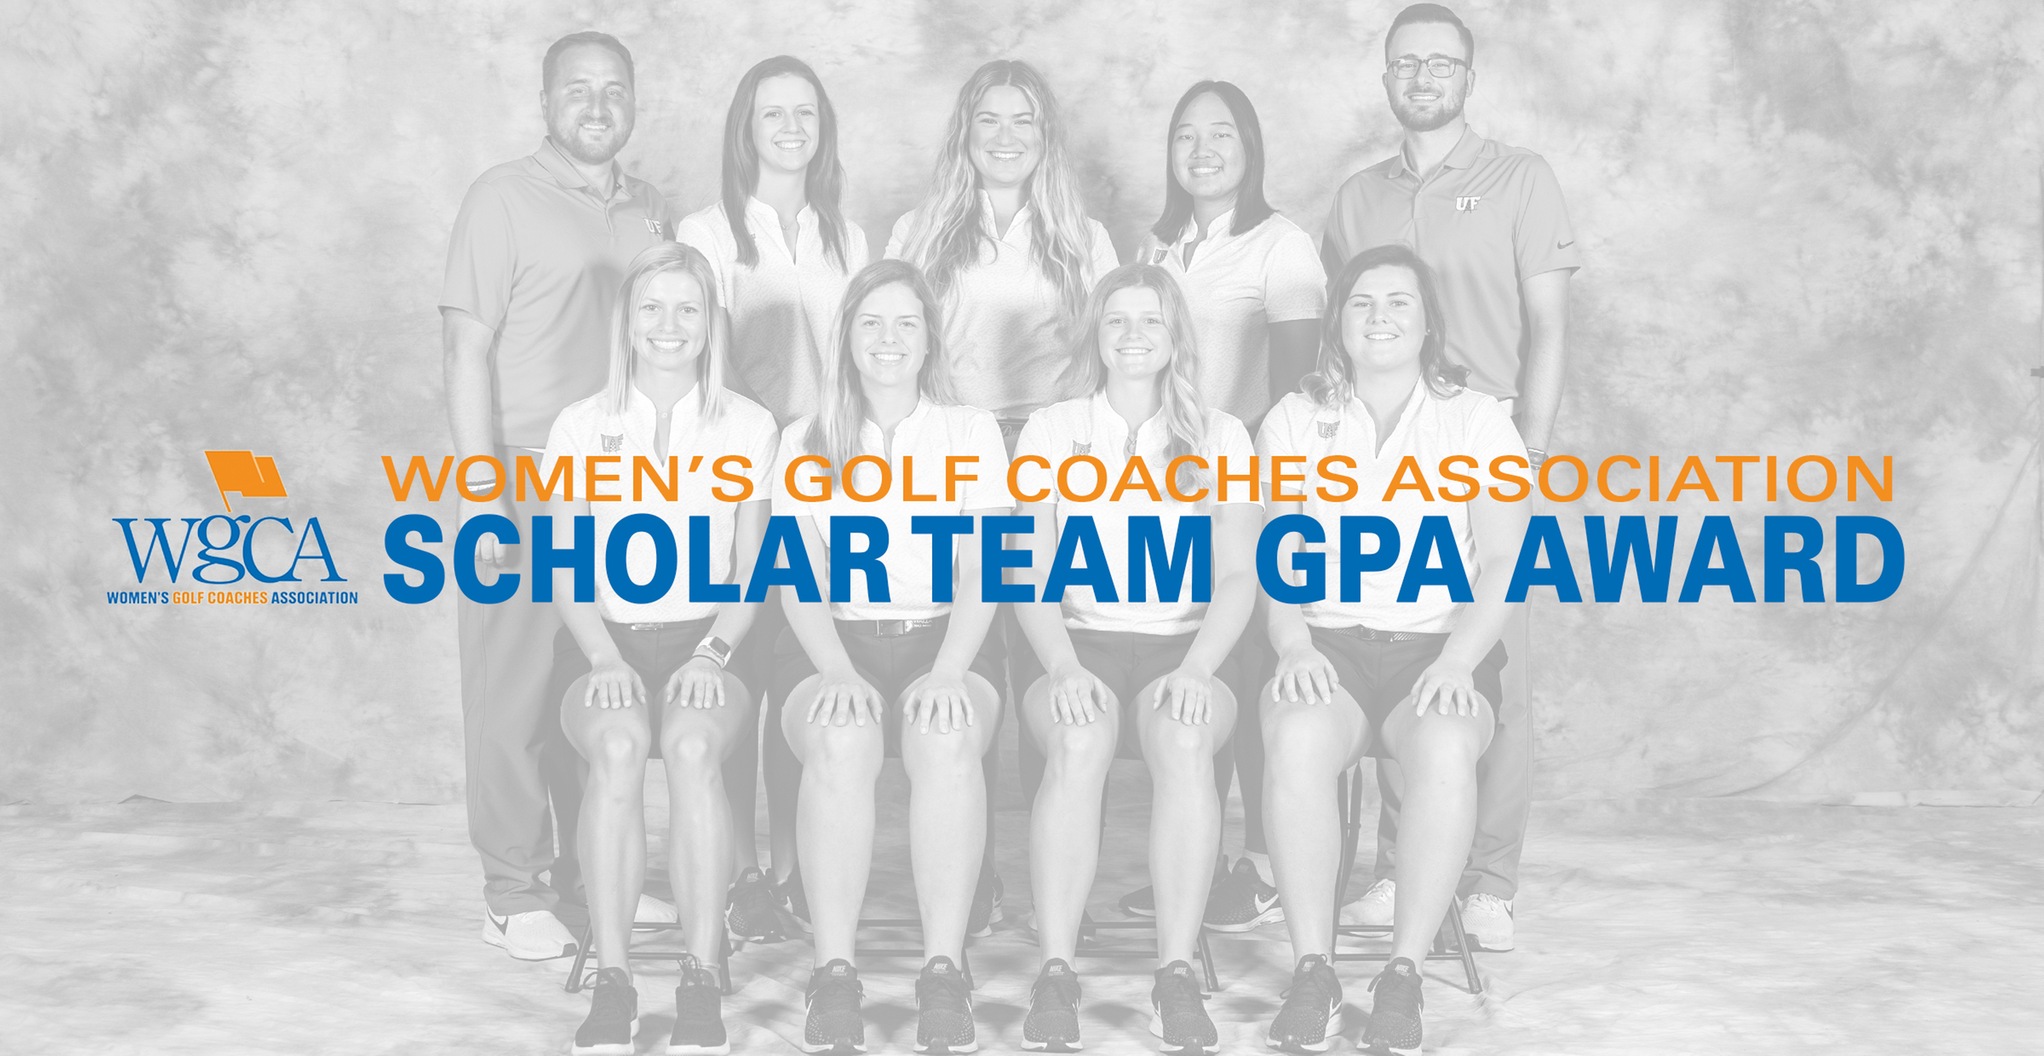 Women's golf scholar team GPA award with team picture in the background.